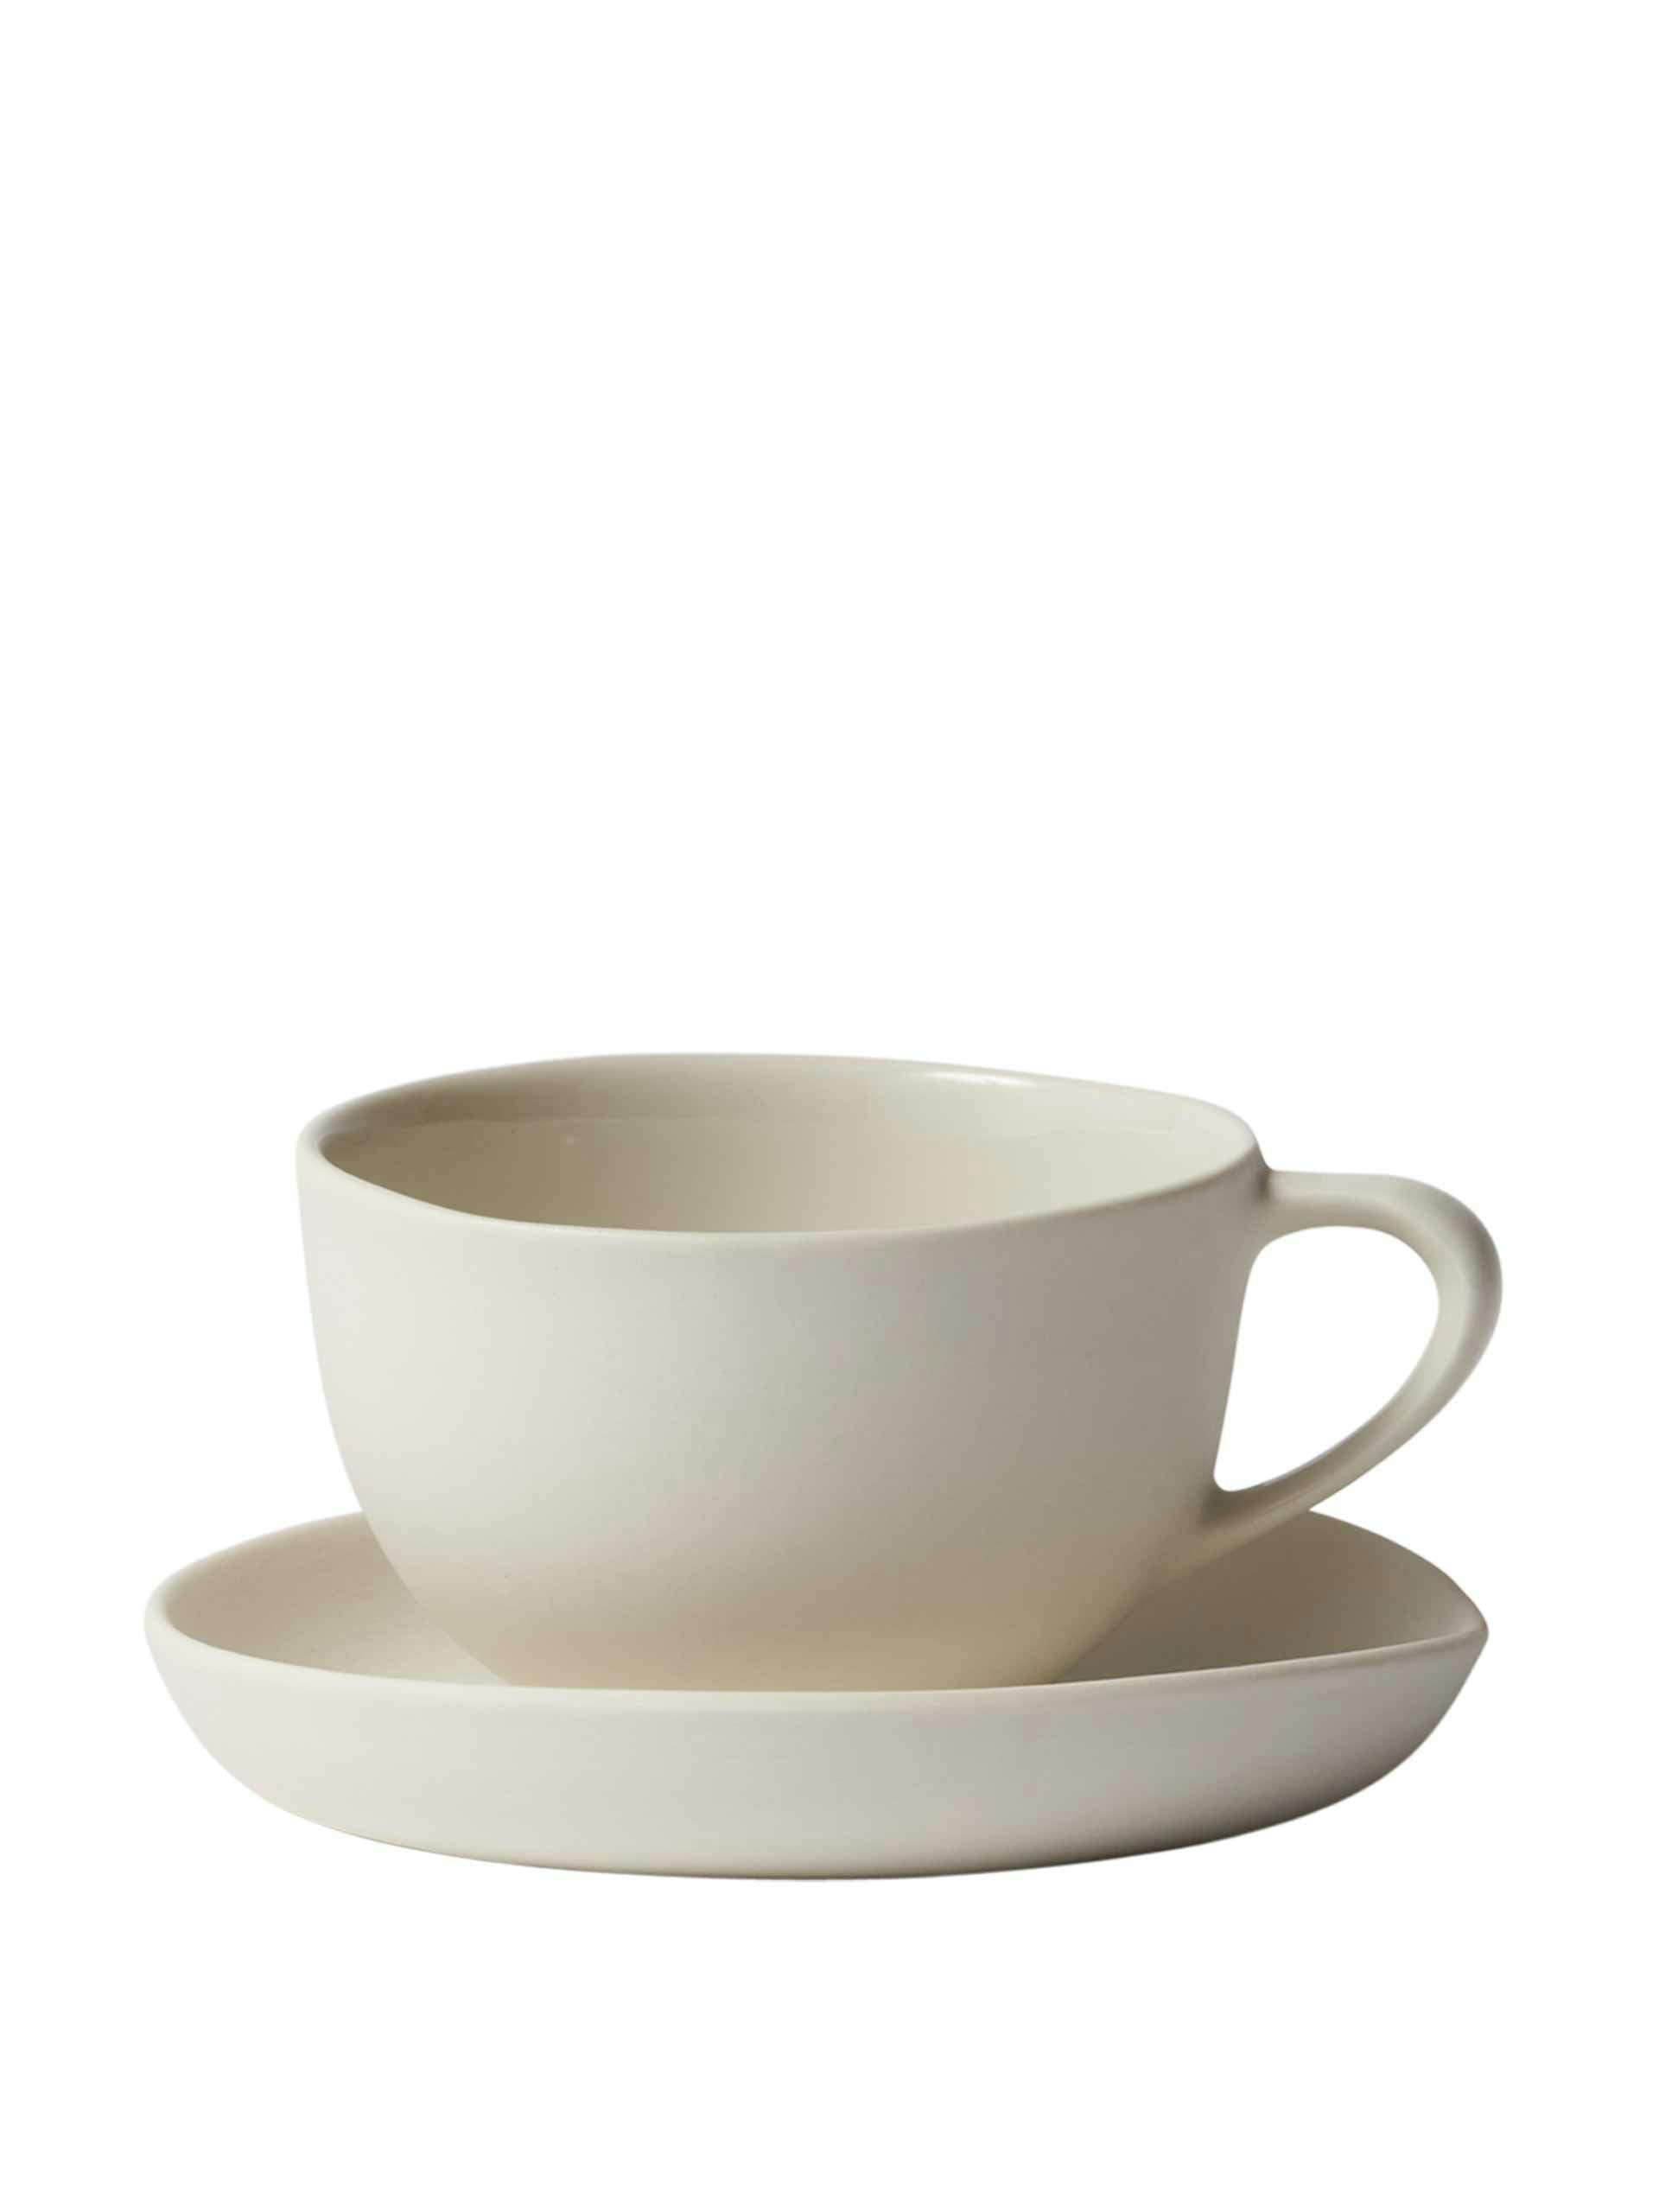 Round tea cup and saucer